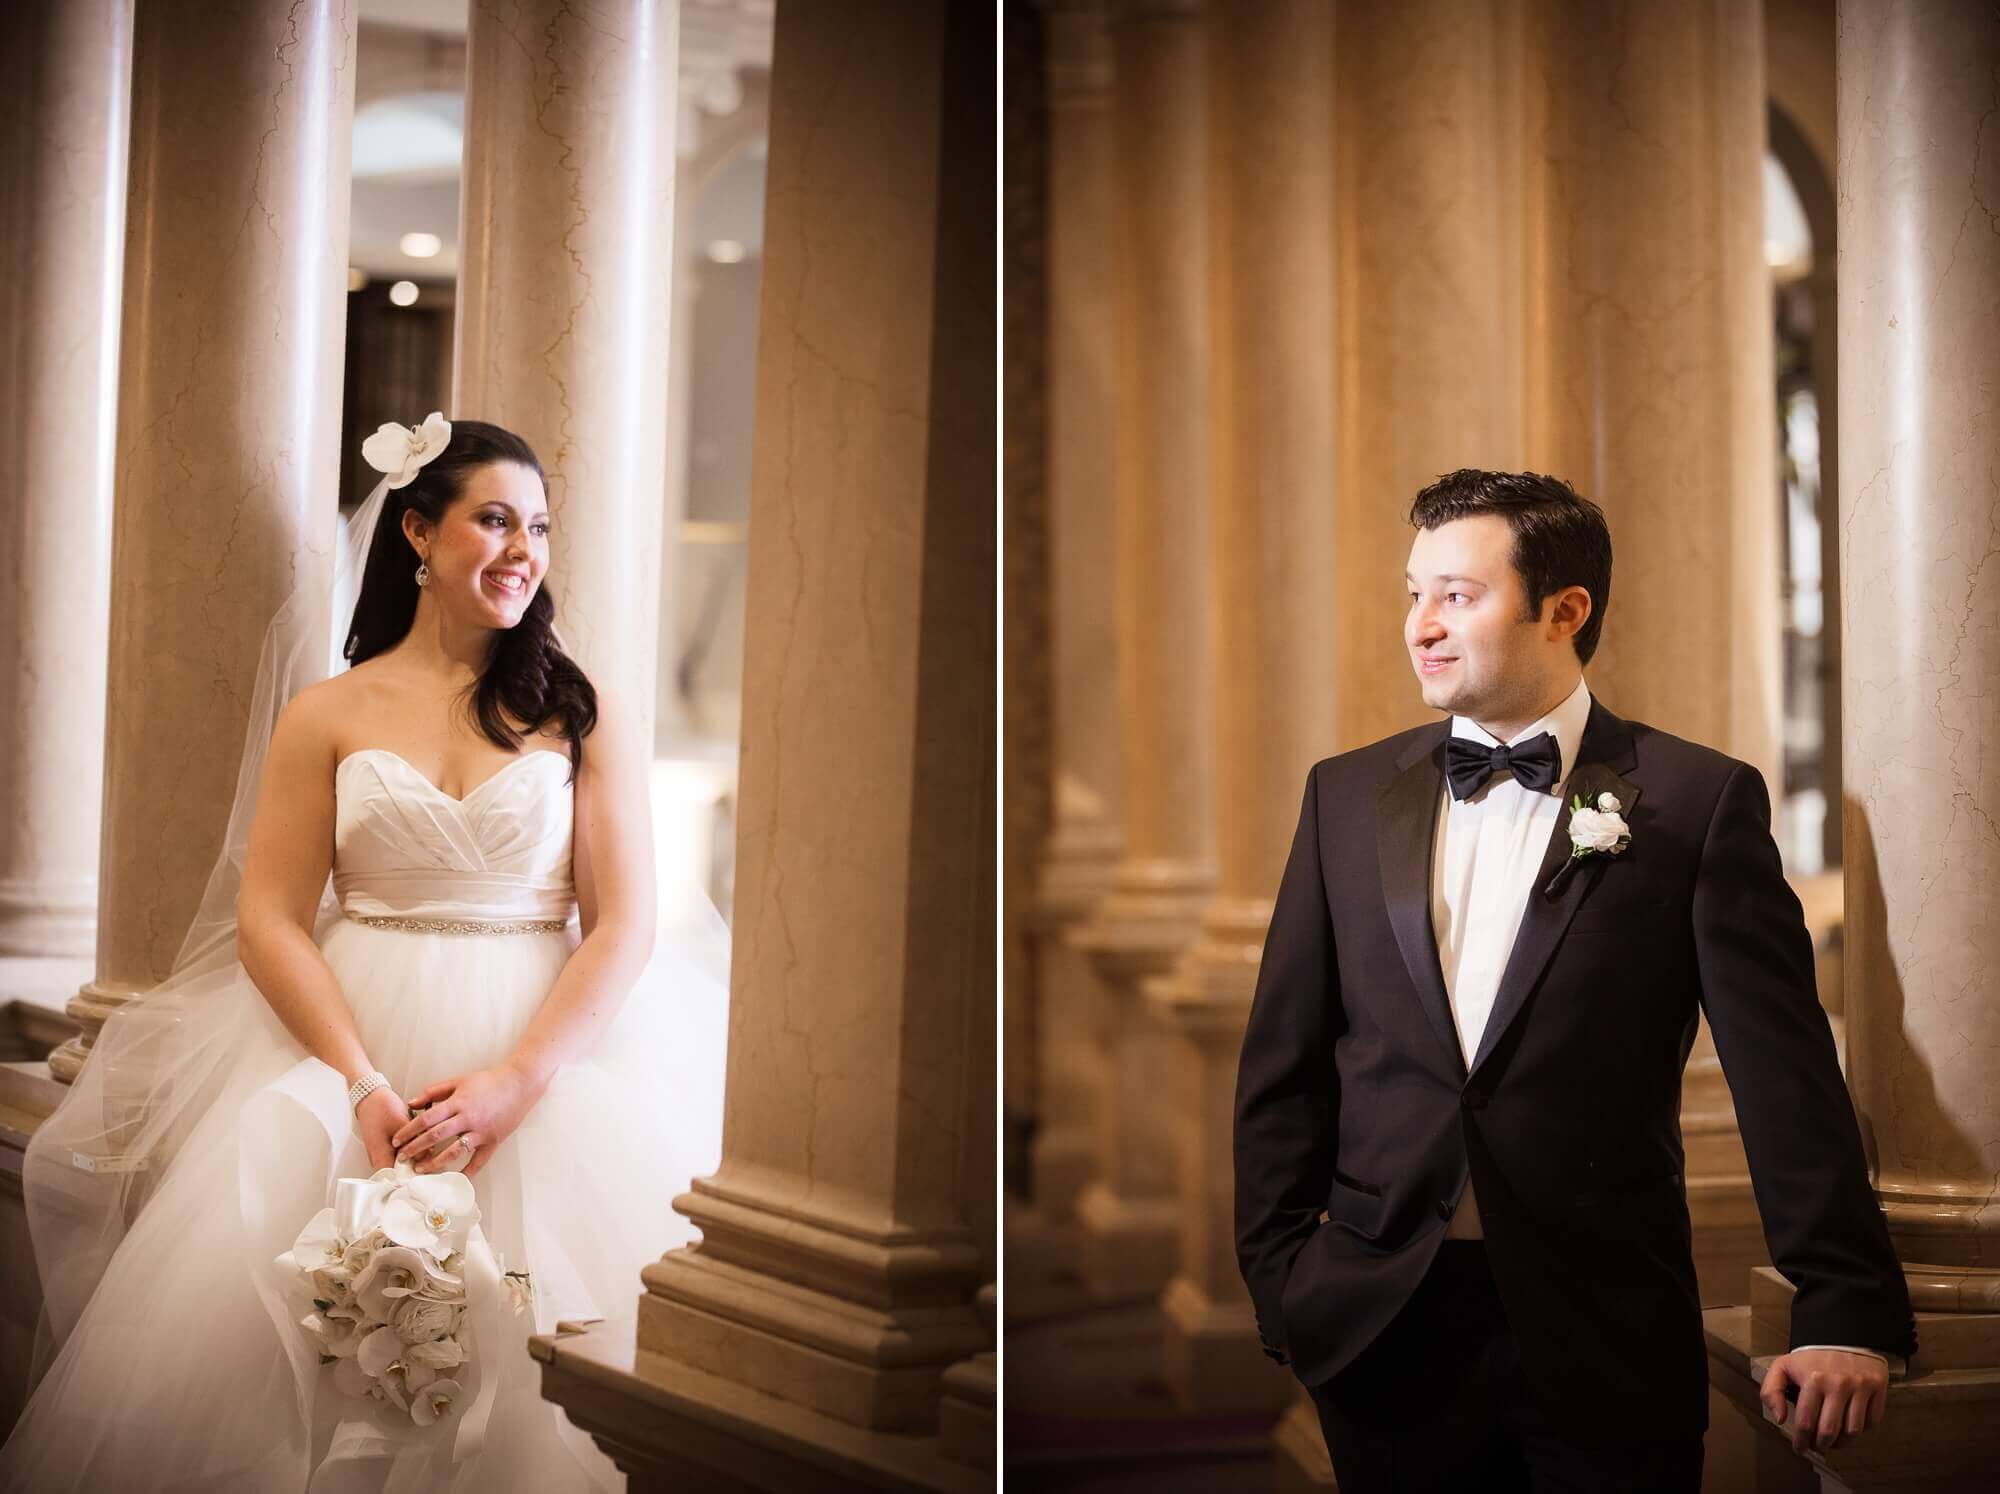 Individual portraits of the bride and groom leaning on the columns at the Omni King Edward Hotel in Toronto 